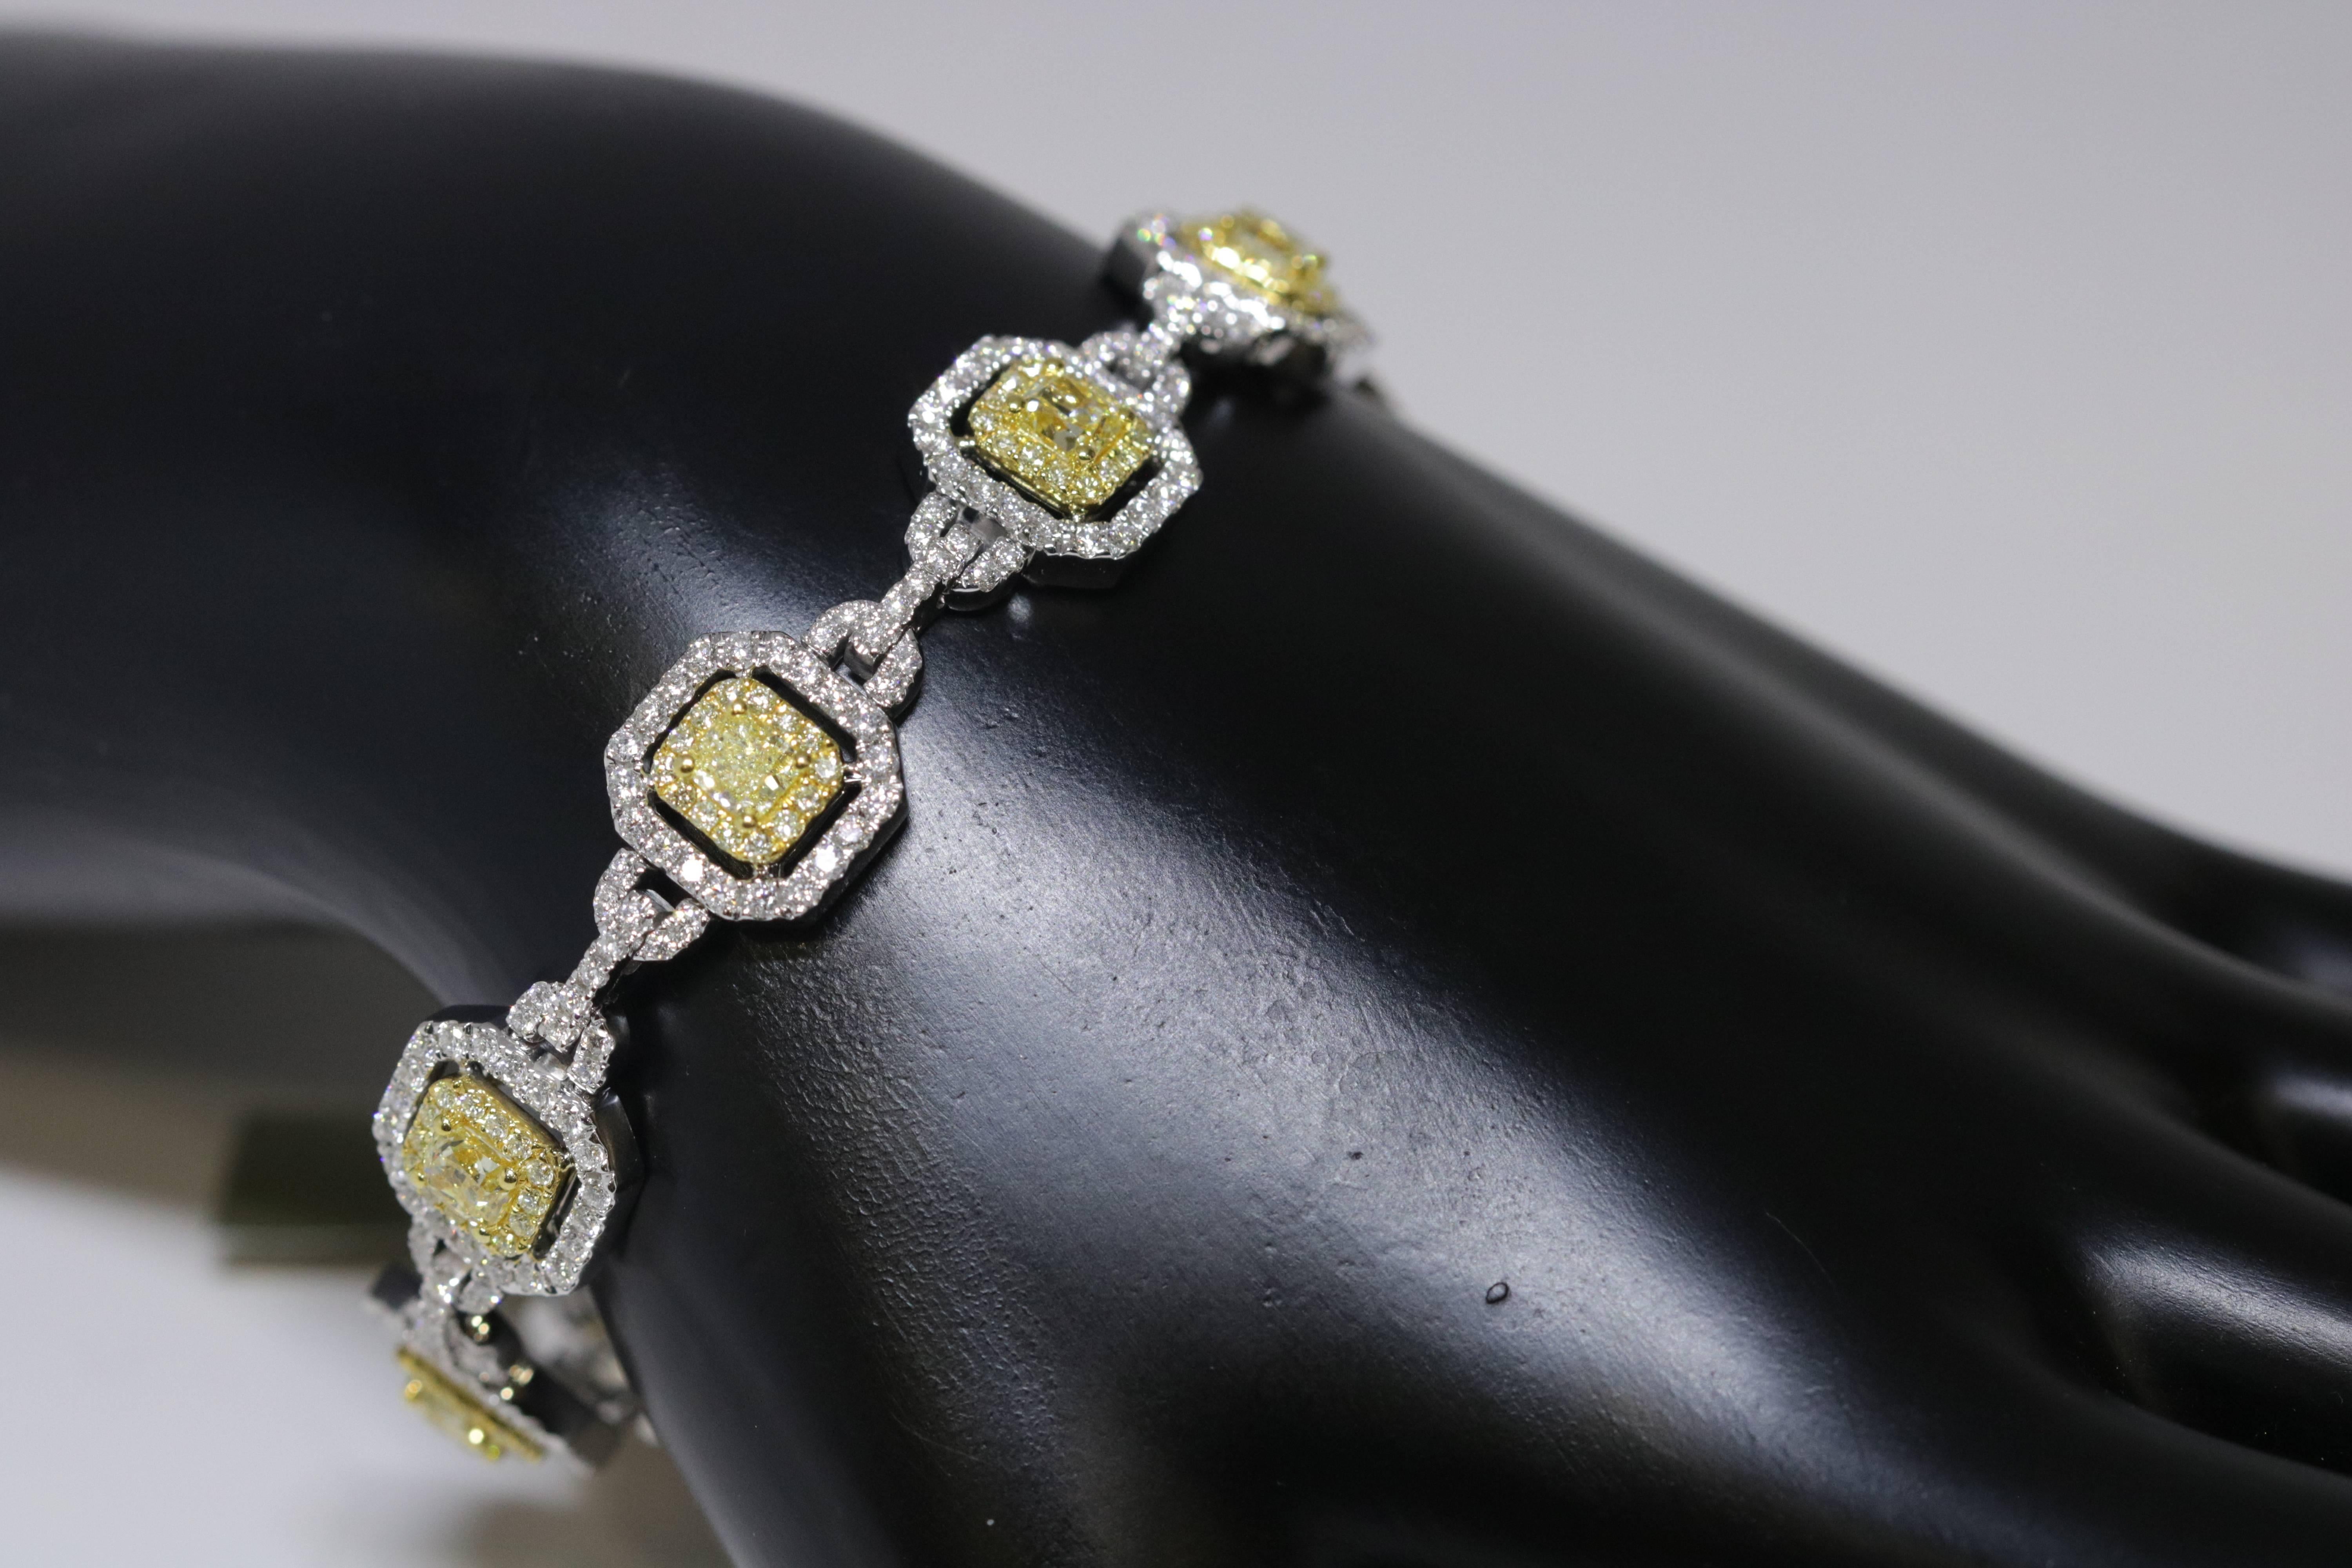 Beautiful art deco inspired ladies bracelet with white and fancy yellow diamonds. Total diamond weight is 7.84ct.